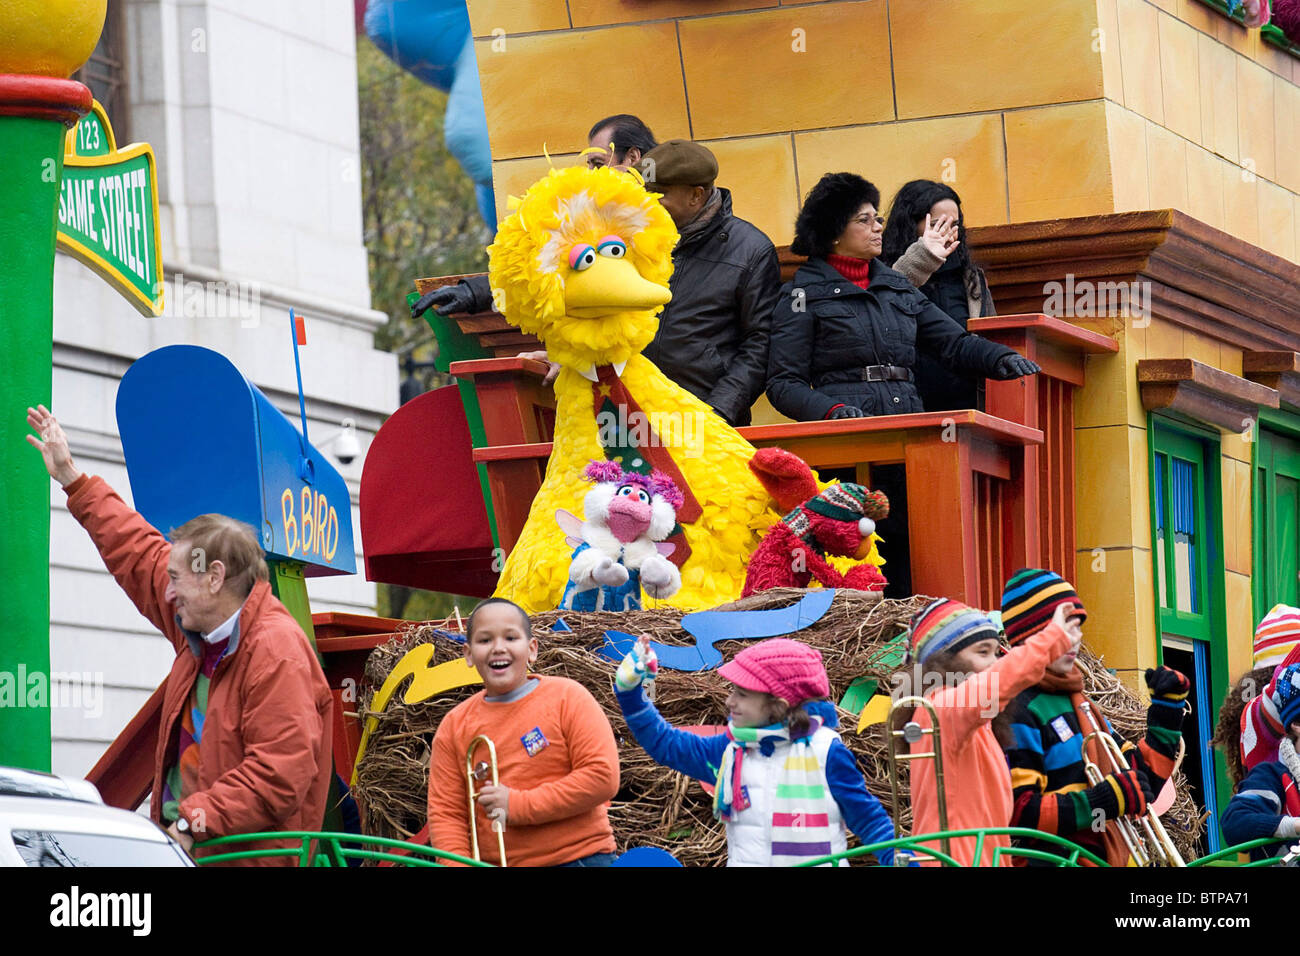 83Rd Annual Macy's Thanksgiving Day Parade Banque D'Images